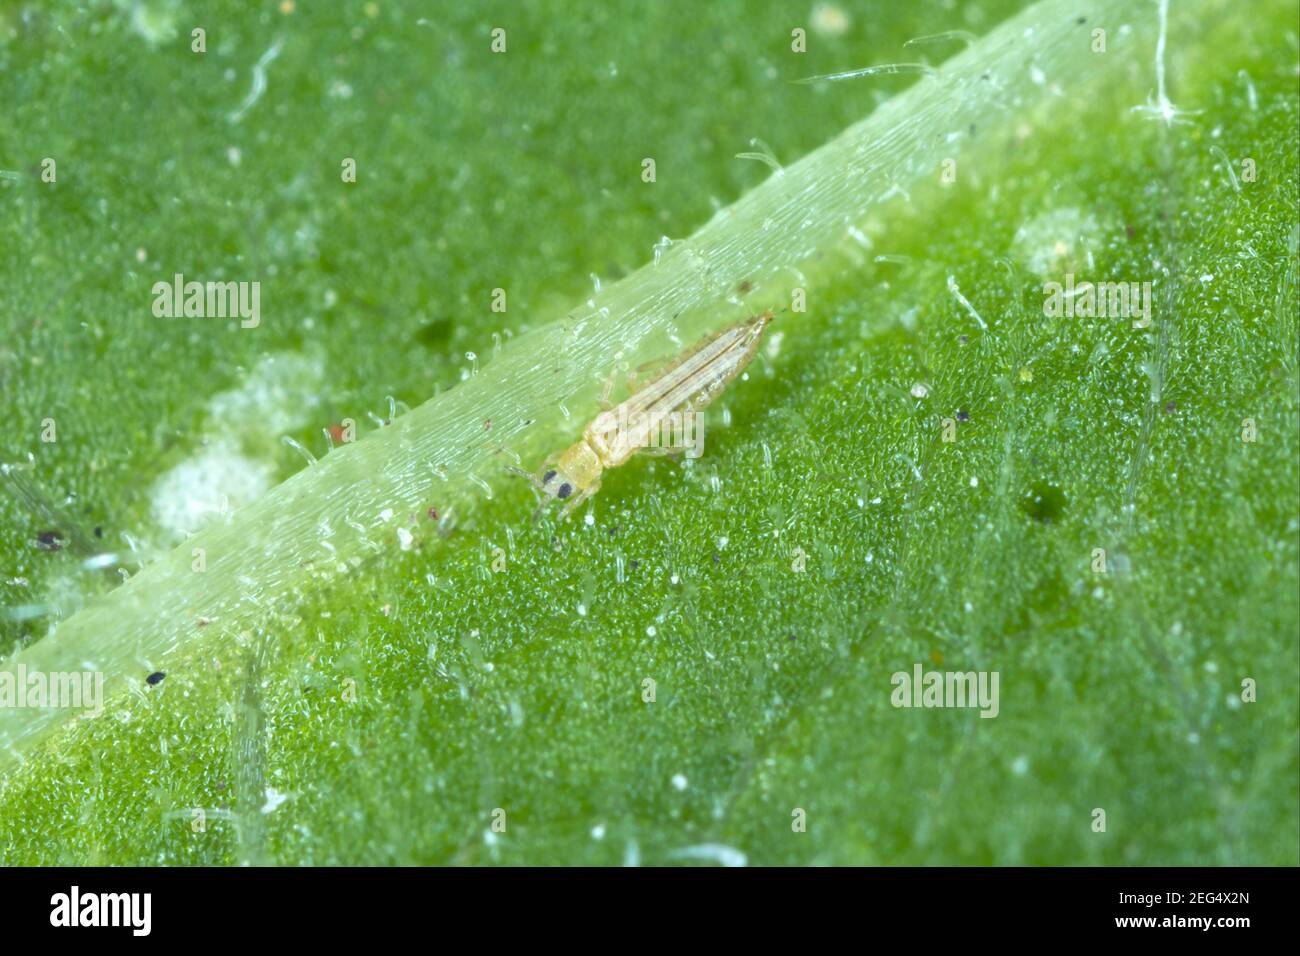 The western flower thrips (Frankliniella occidentalis) and damage caused by it pest on the bean leaf. Is an important pest insect in agriculture. Stock Photo